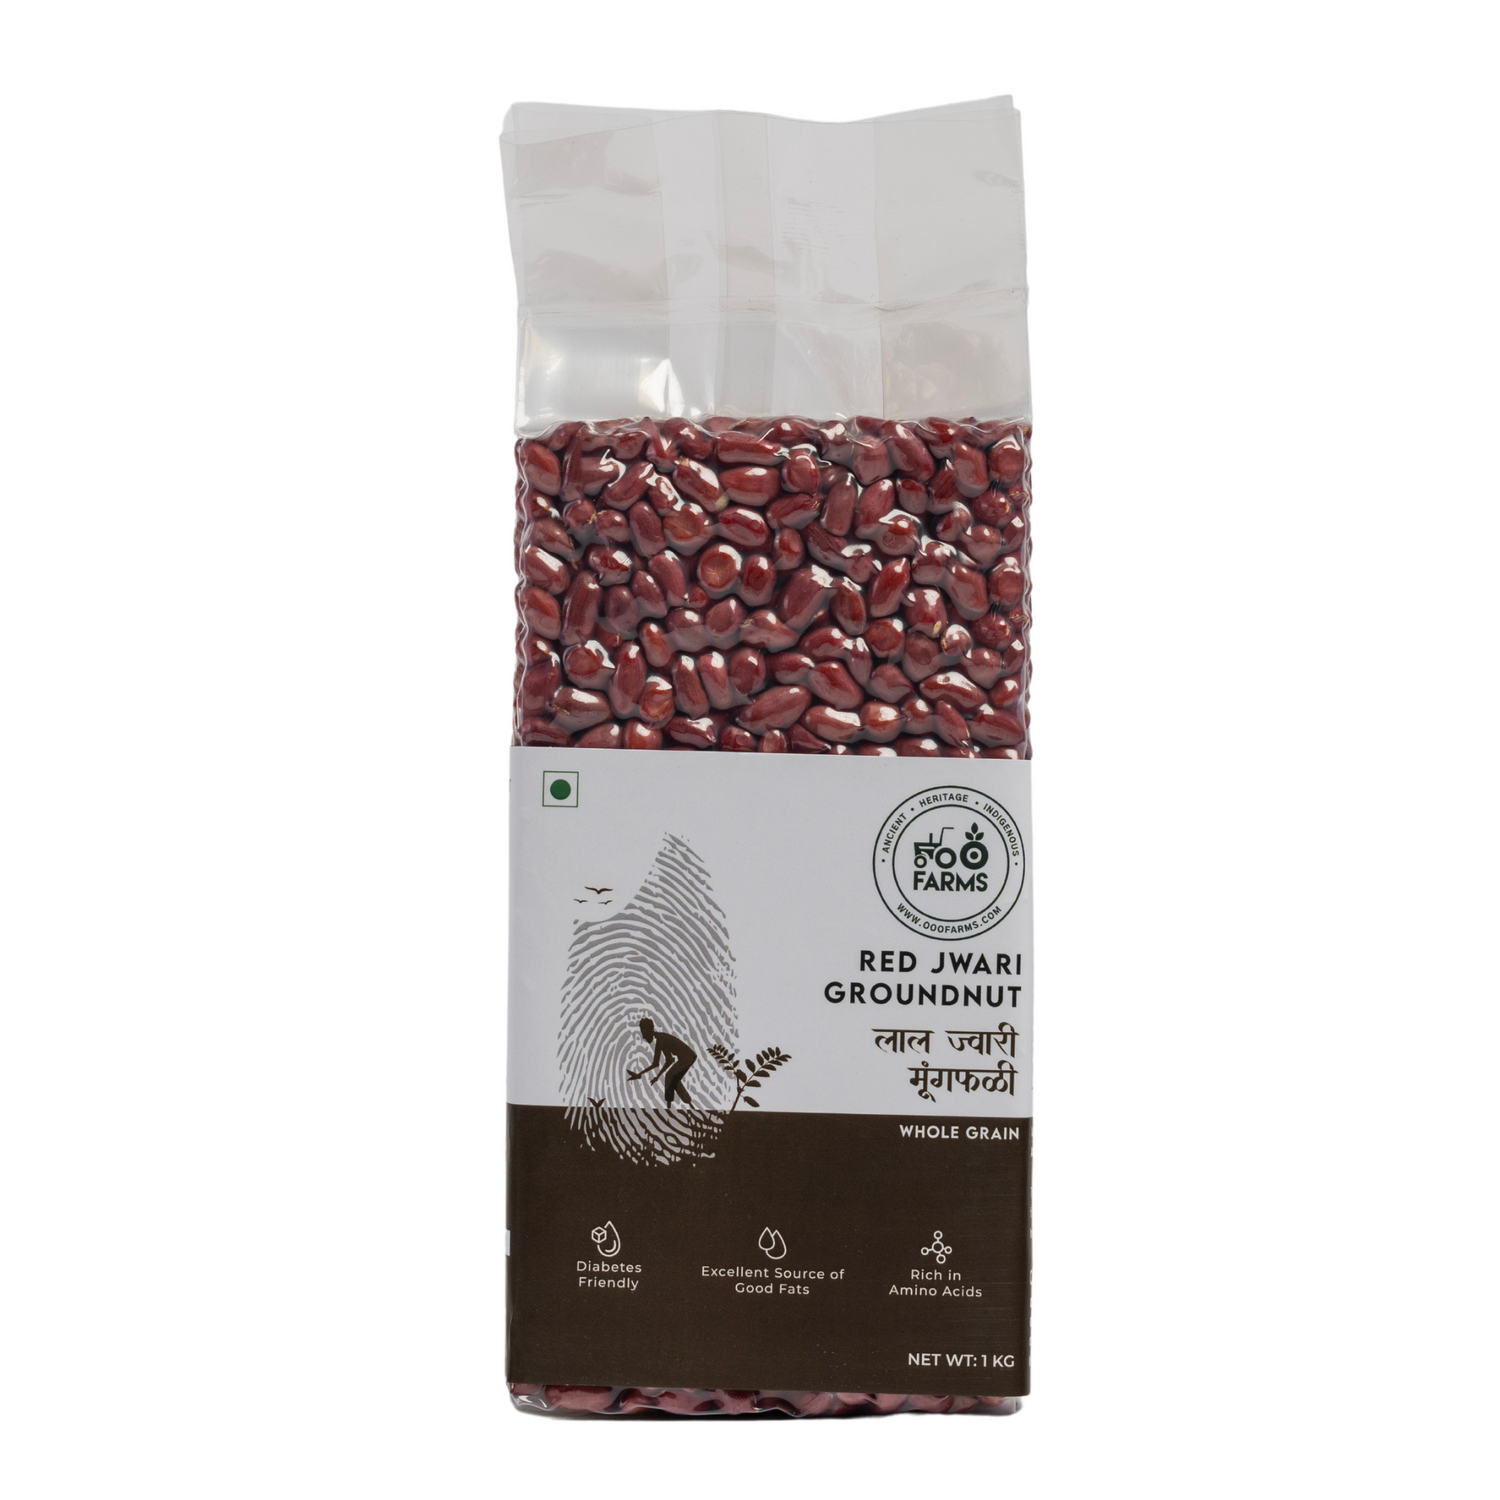 OOO Farms Whole Red Jwari Groundnut Package Frontside